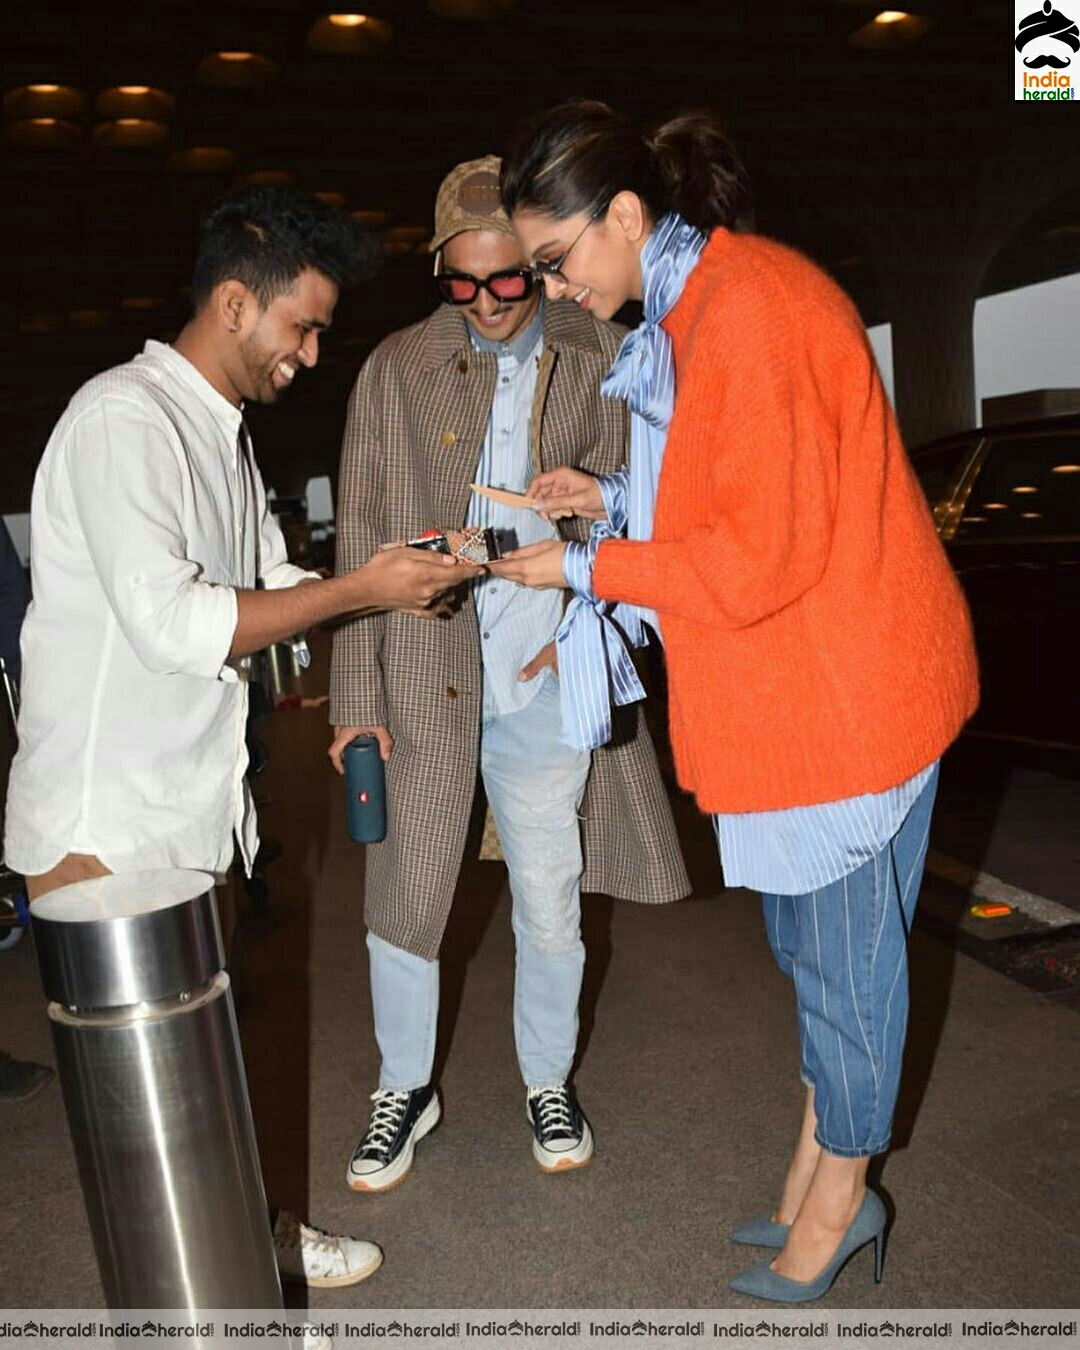 Cute Deepika padukone Cuts the Cake Brought By Photographer At Airport